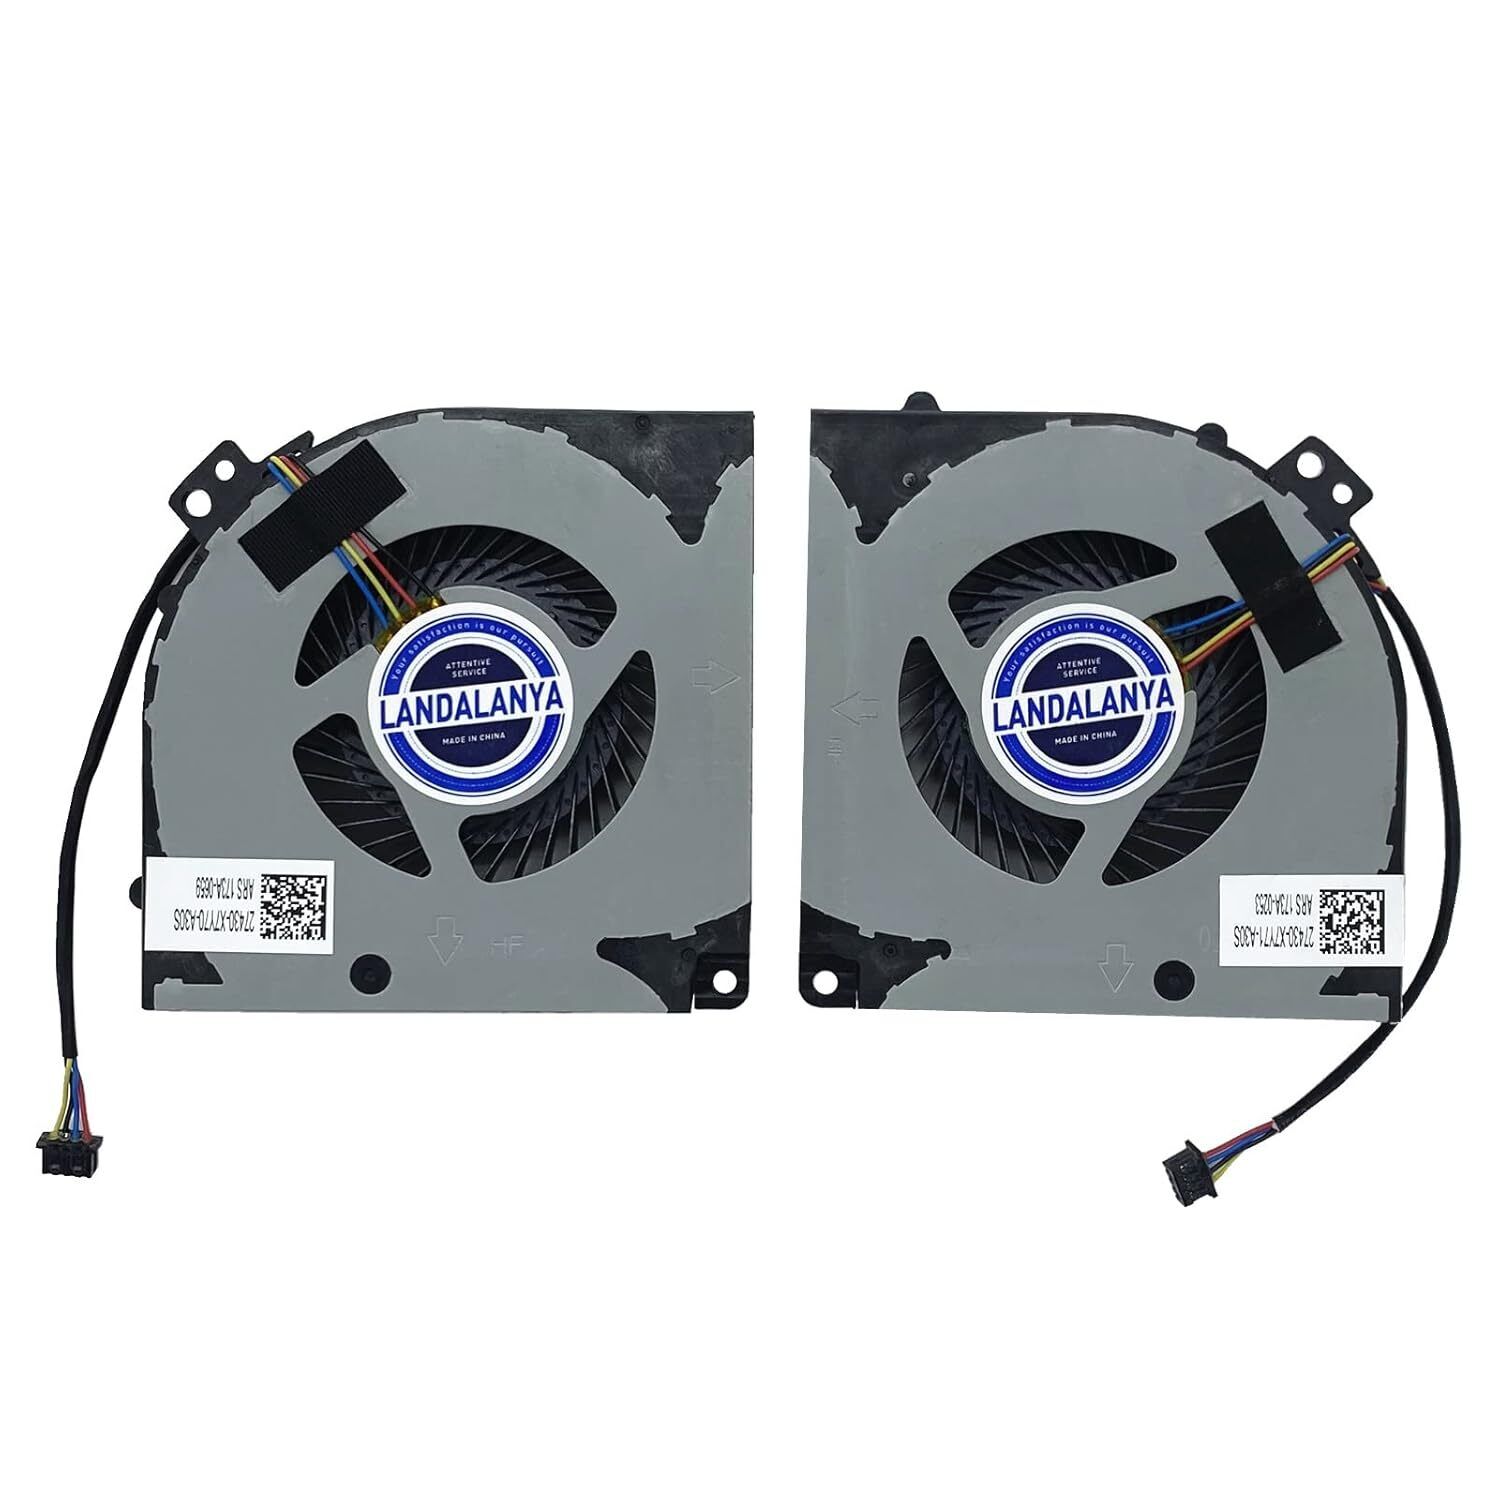 Replacement New Laptop Cpu And Gpu Cooling Fan For Gigabyte Aorus X7 Dt V5 V6